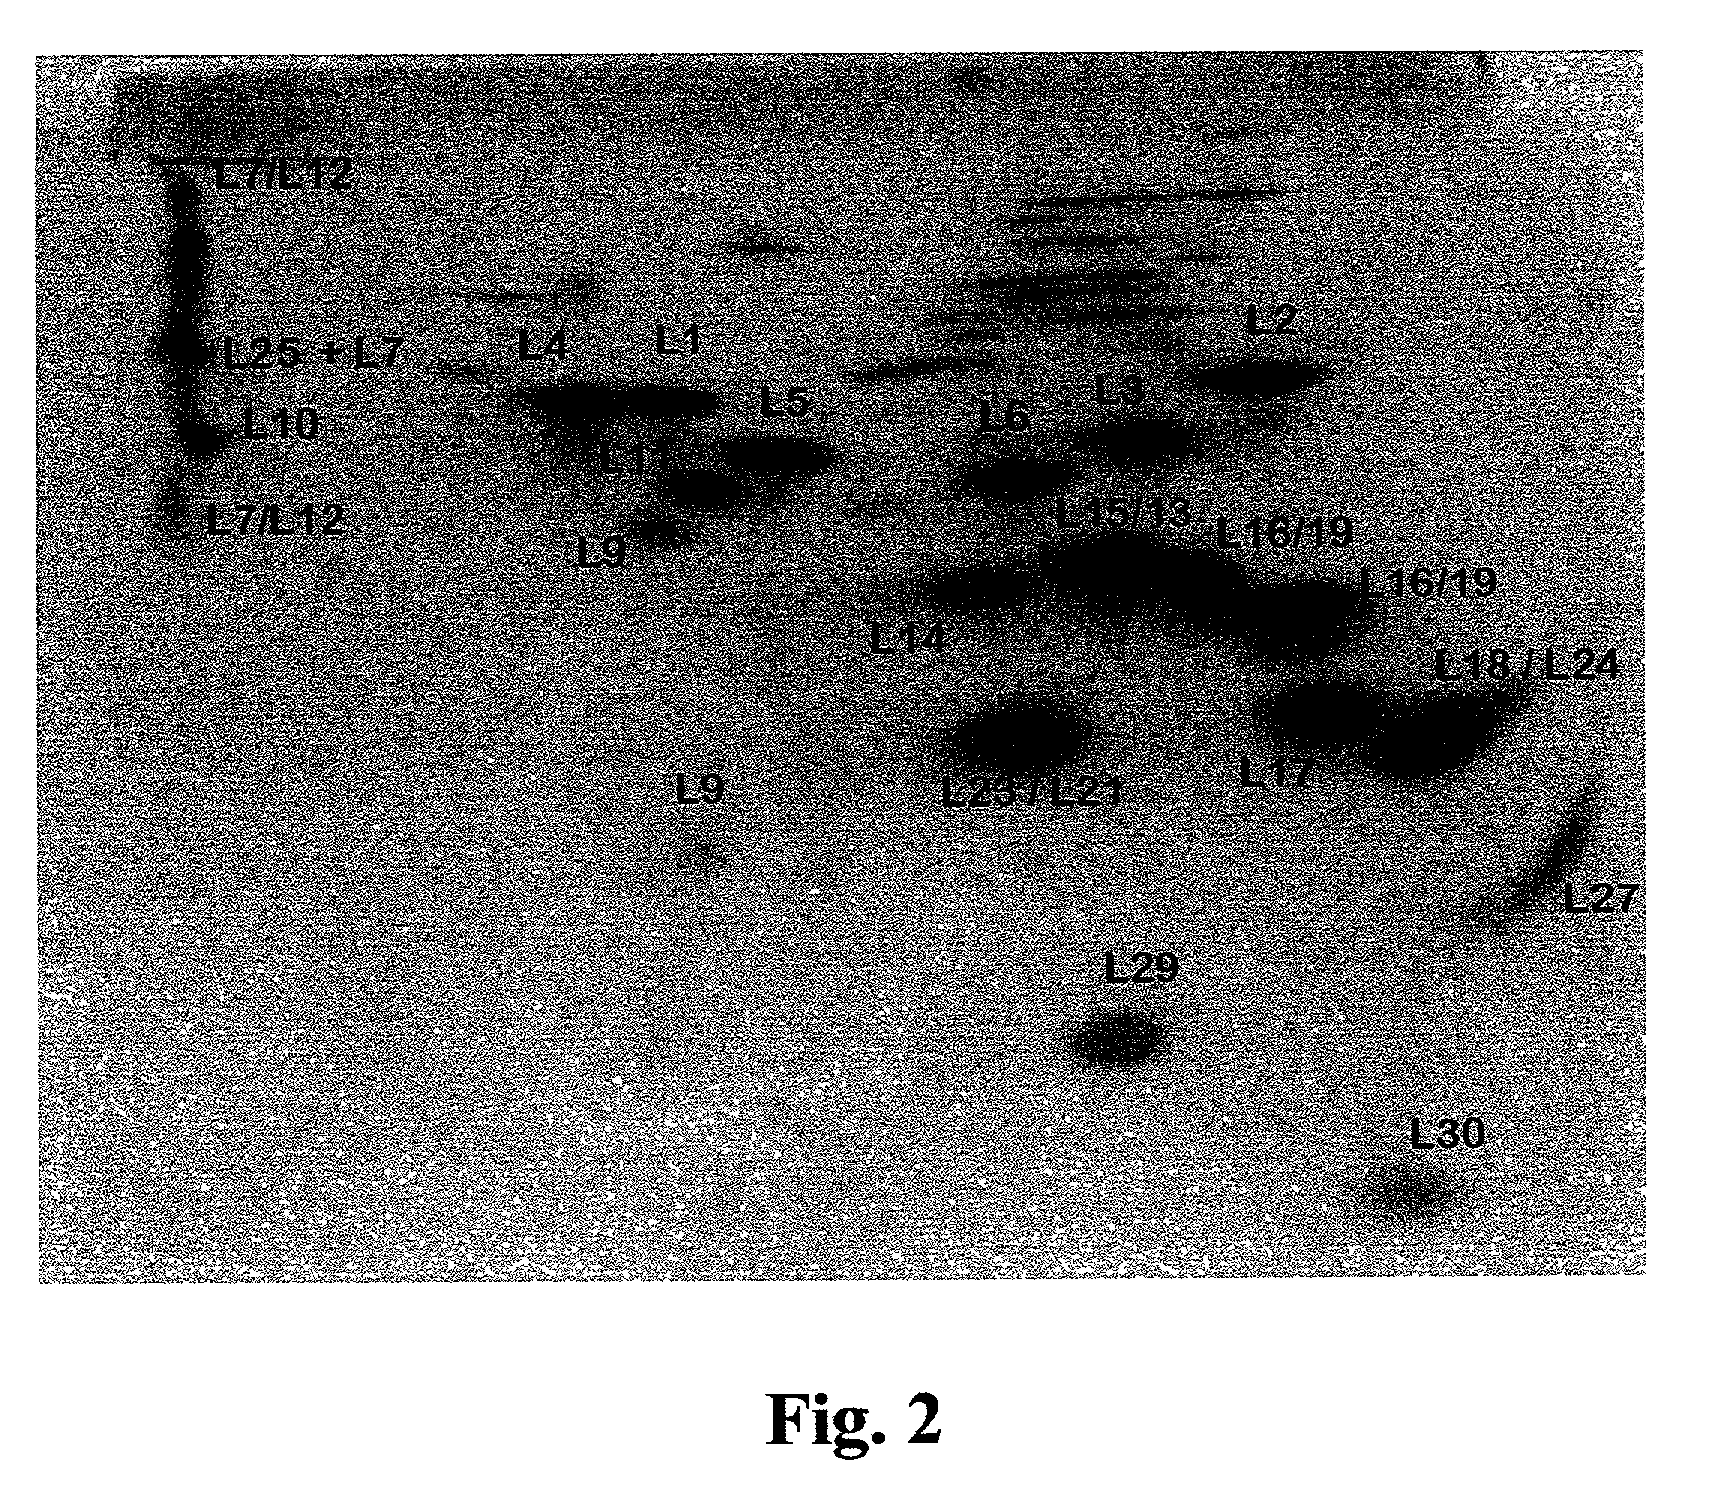 Methods of growing crystals of free and antibiotic complexed large ribosomal subunits, and methods of rationally designing or identifying antibiotics using structure coordinate data derived from such crystals